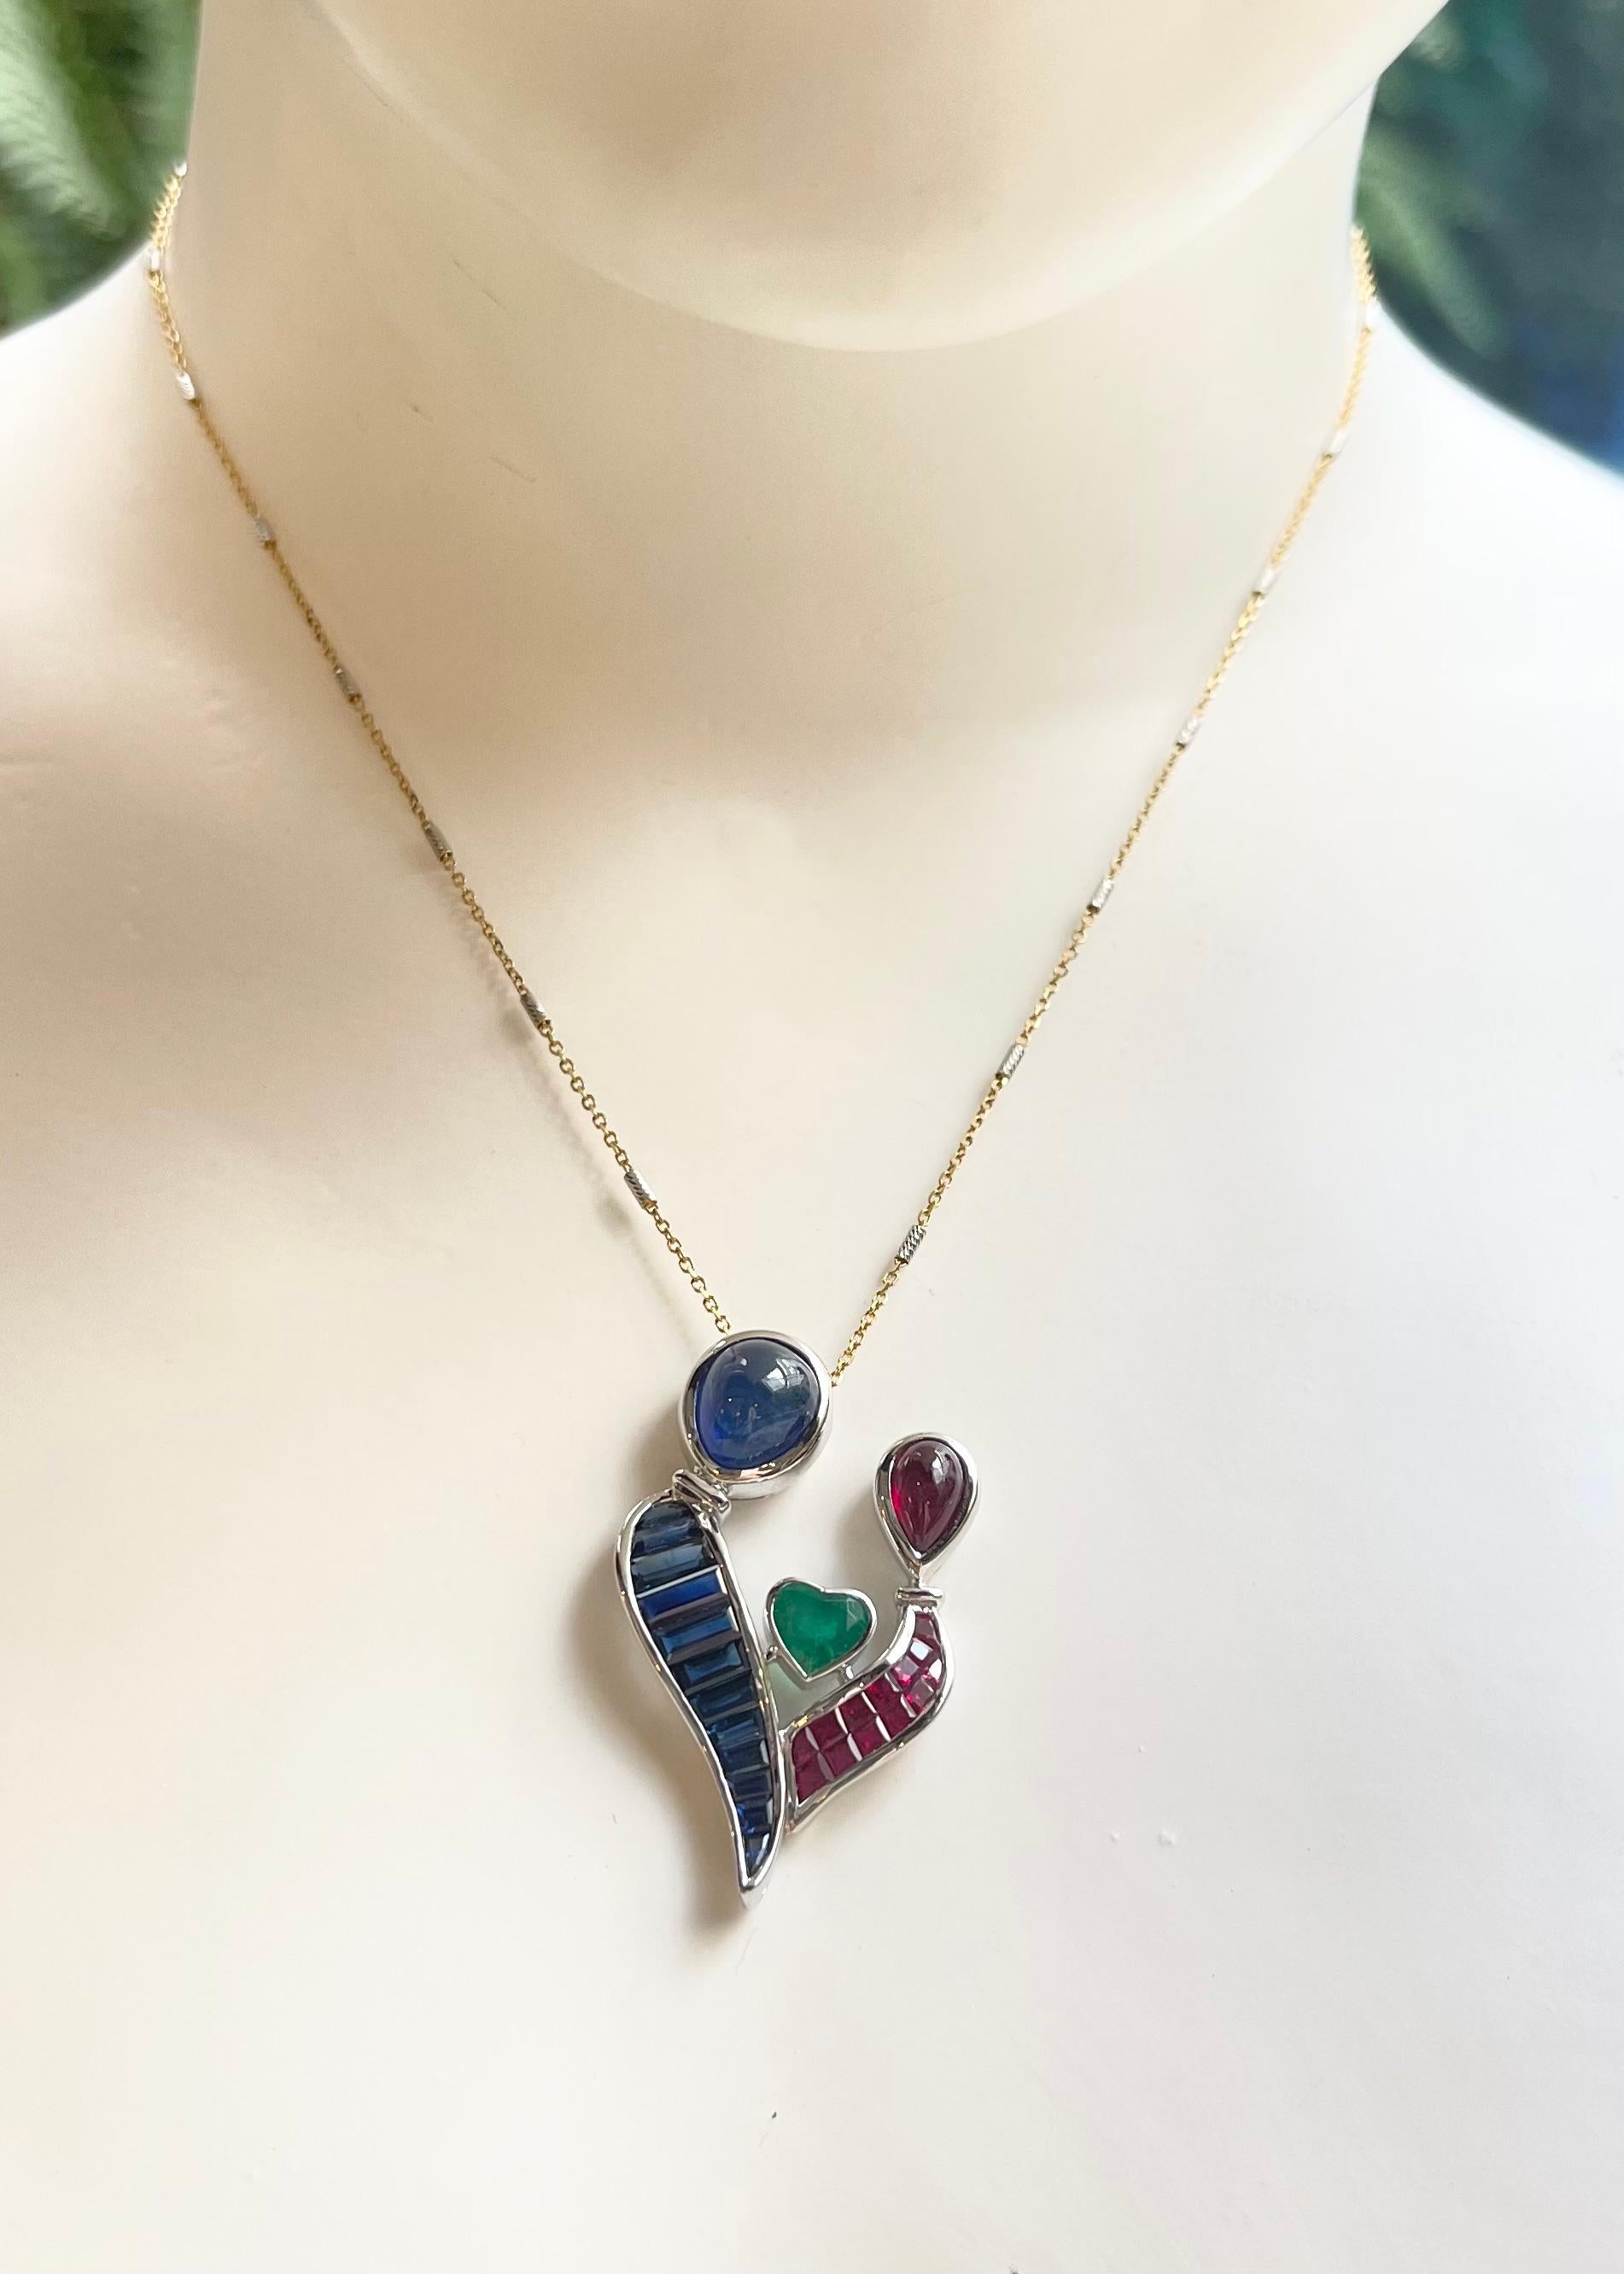 Cabochon Blue Sapphire 3.65 carats, Cabochon Ruby 1.16 carats, Emerald 0.85 carat, Blue Sapphire 2.10 carats and Ruby 0.88 carat Pendant set in 18K White Gold Settings
(chain not included)

Width: 2.3 cm 
Length: 3.6 cm
Total Weight: 8.02 grams

